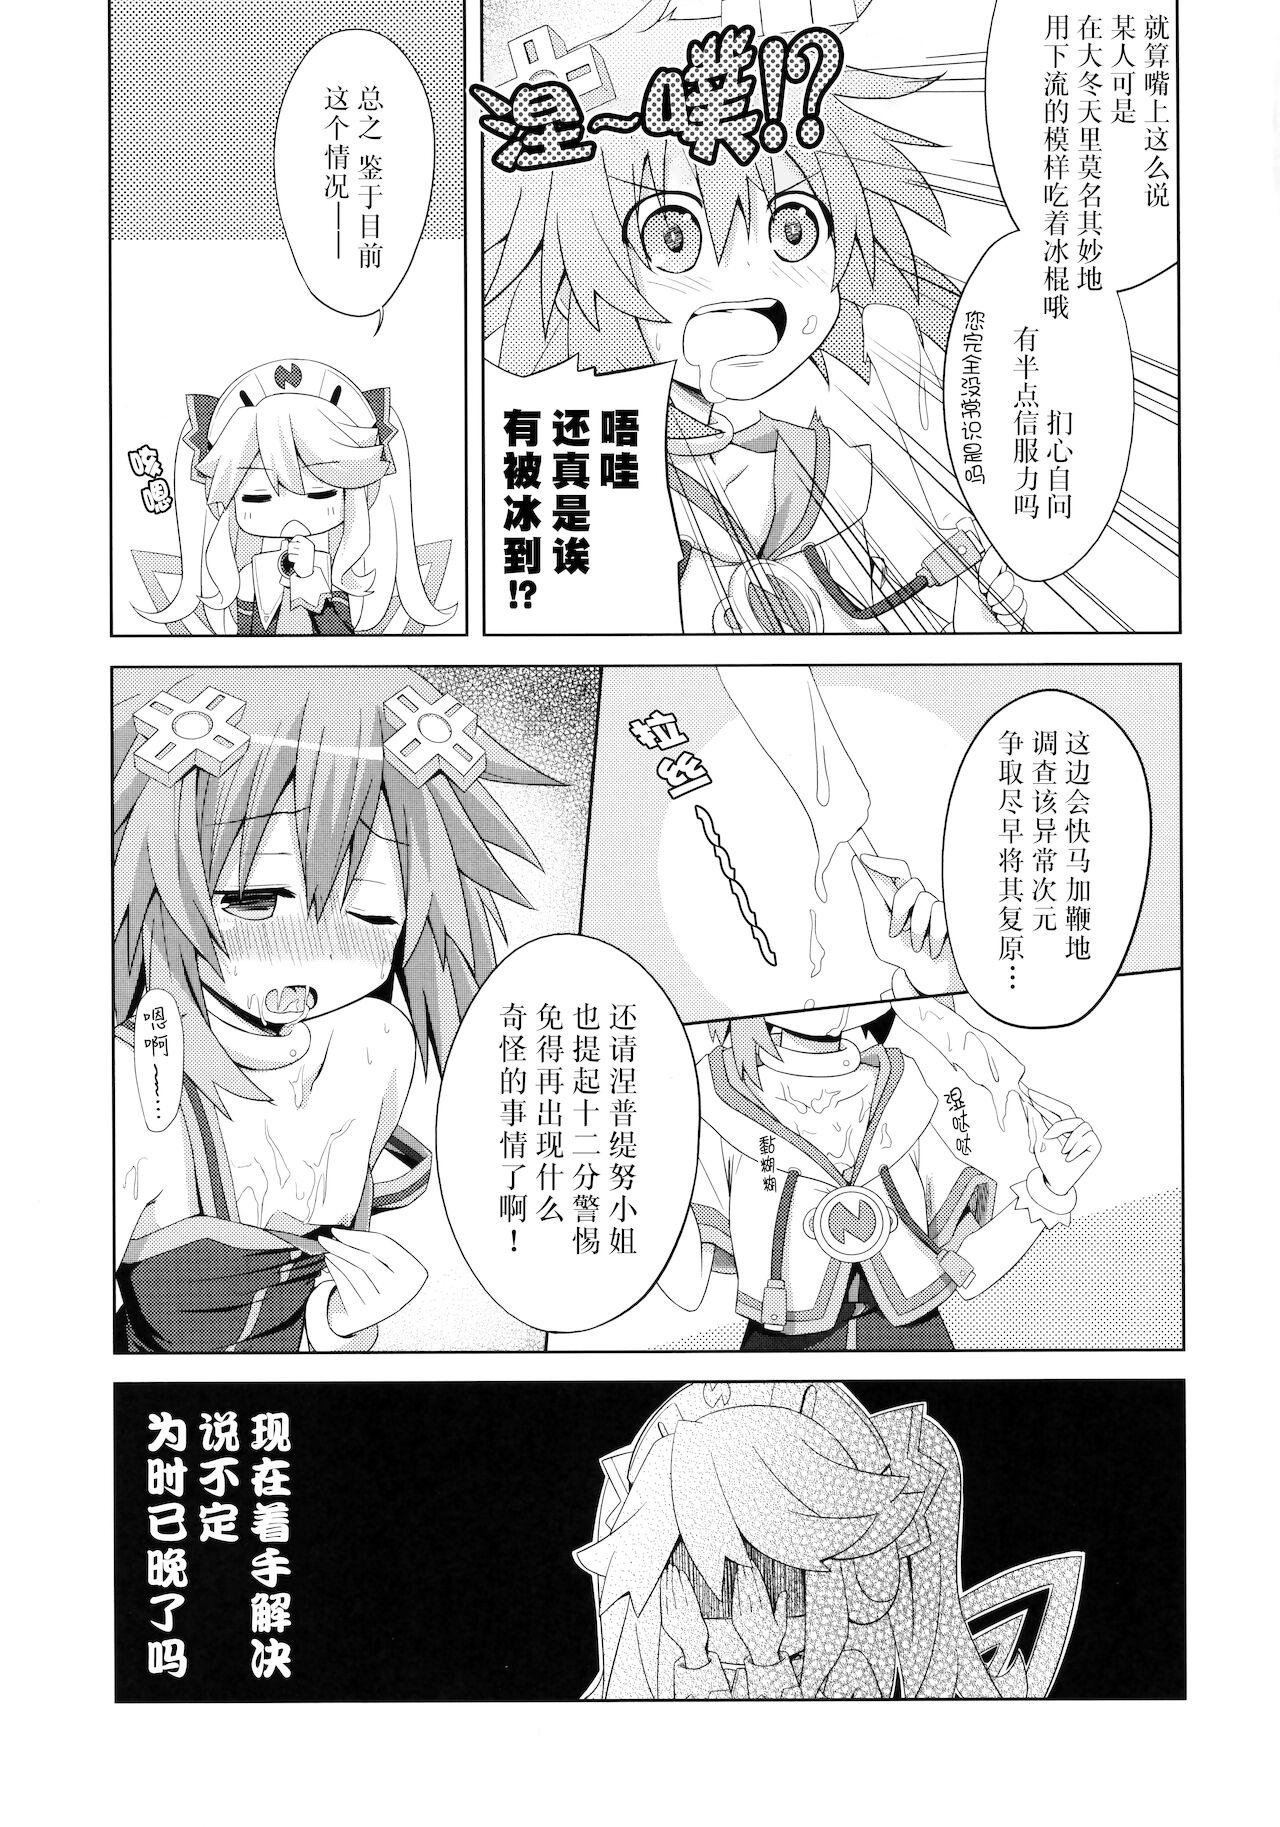 Mum A certain Nepgear was harmed in the making of this doujinshi - Hyperdimension neptunia | choujigen game neptune Roundass - Page 6